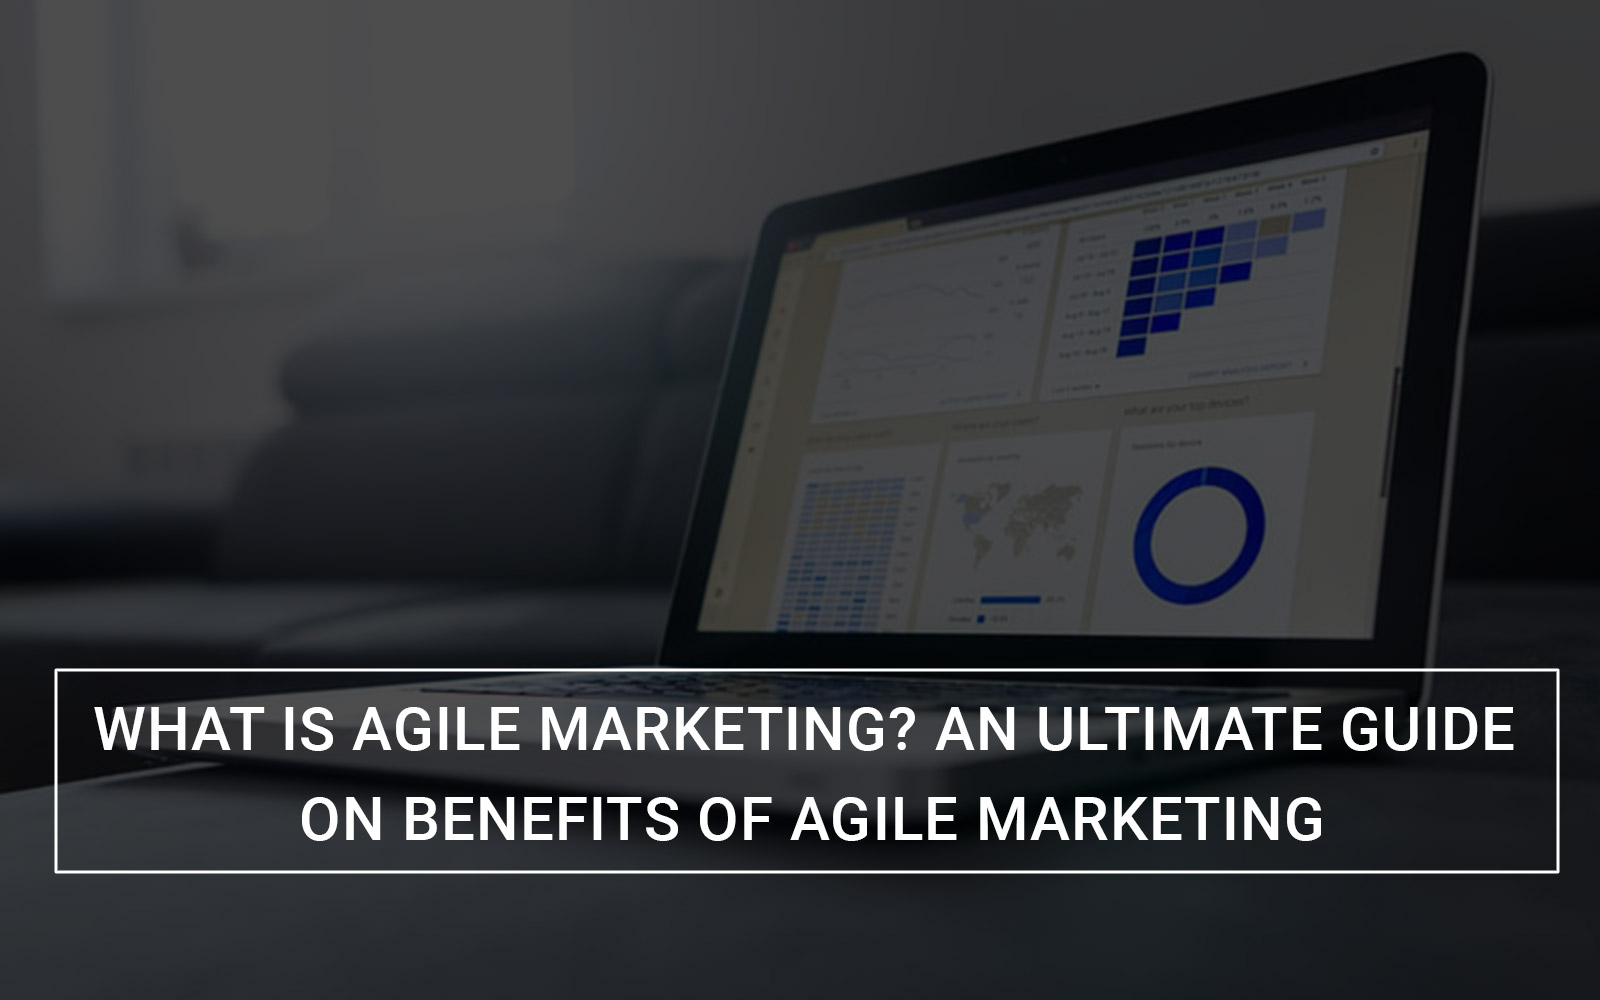 What is Agile Marketing? An Ultimate Guide on Benefits of Agile Marketing